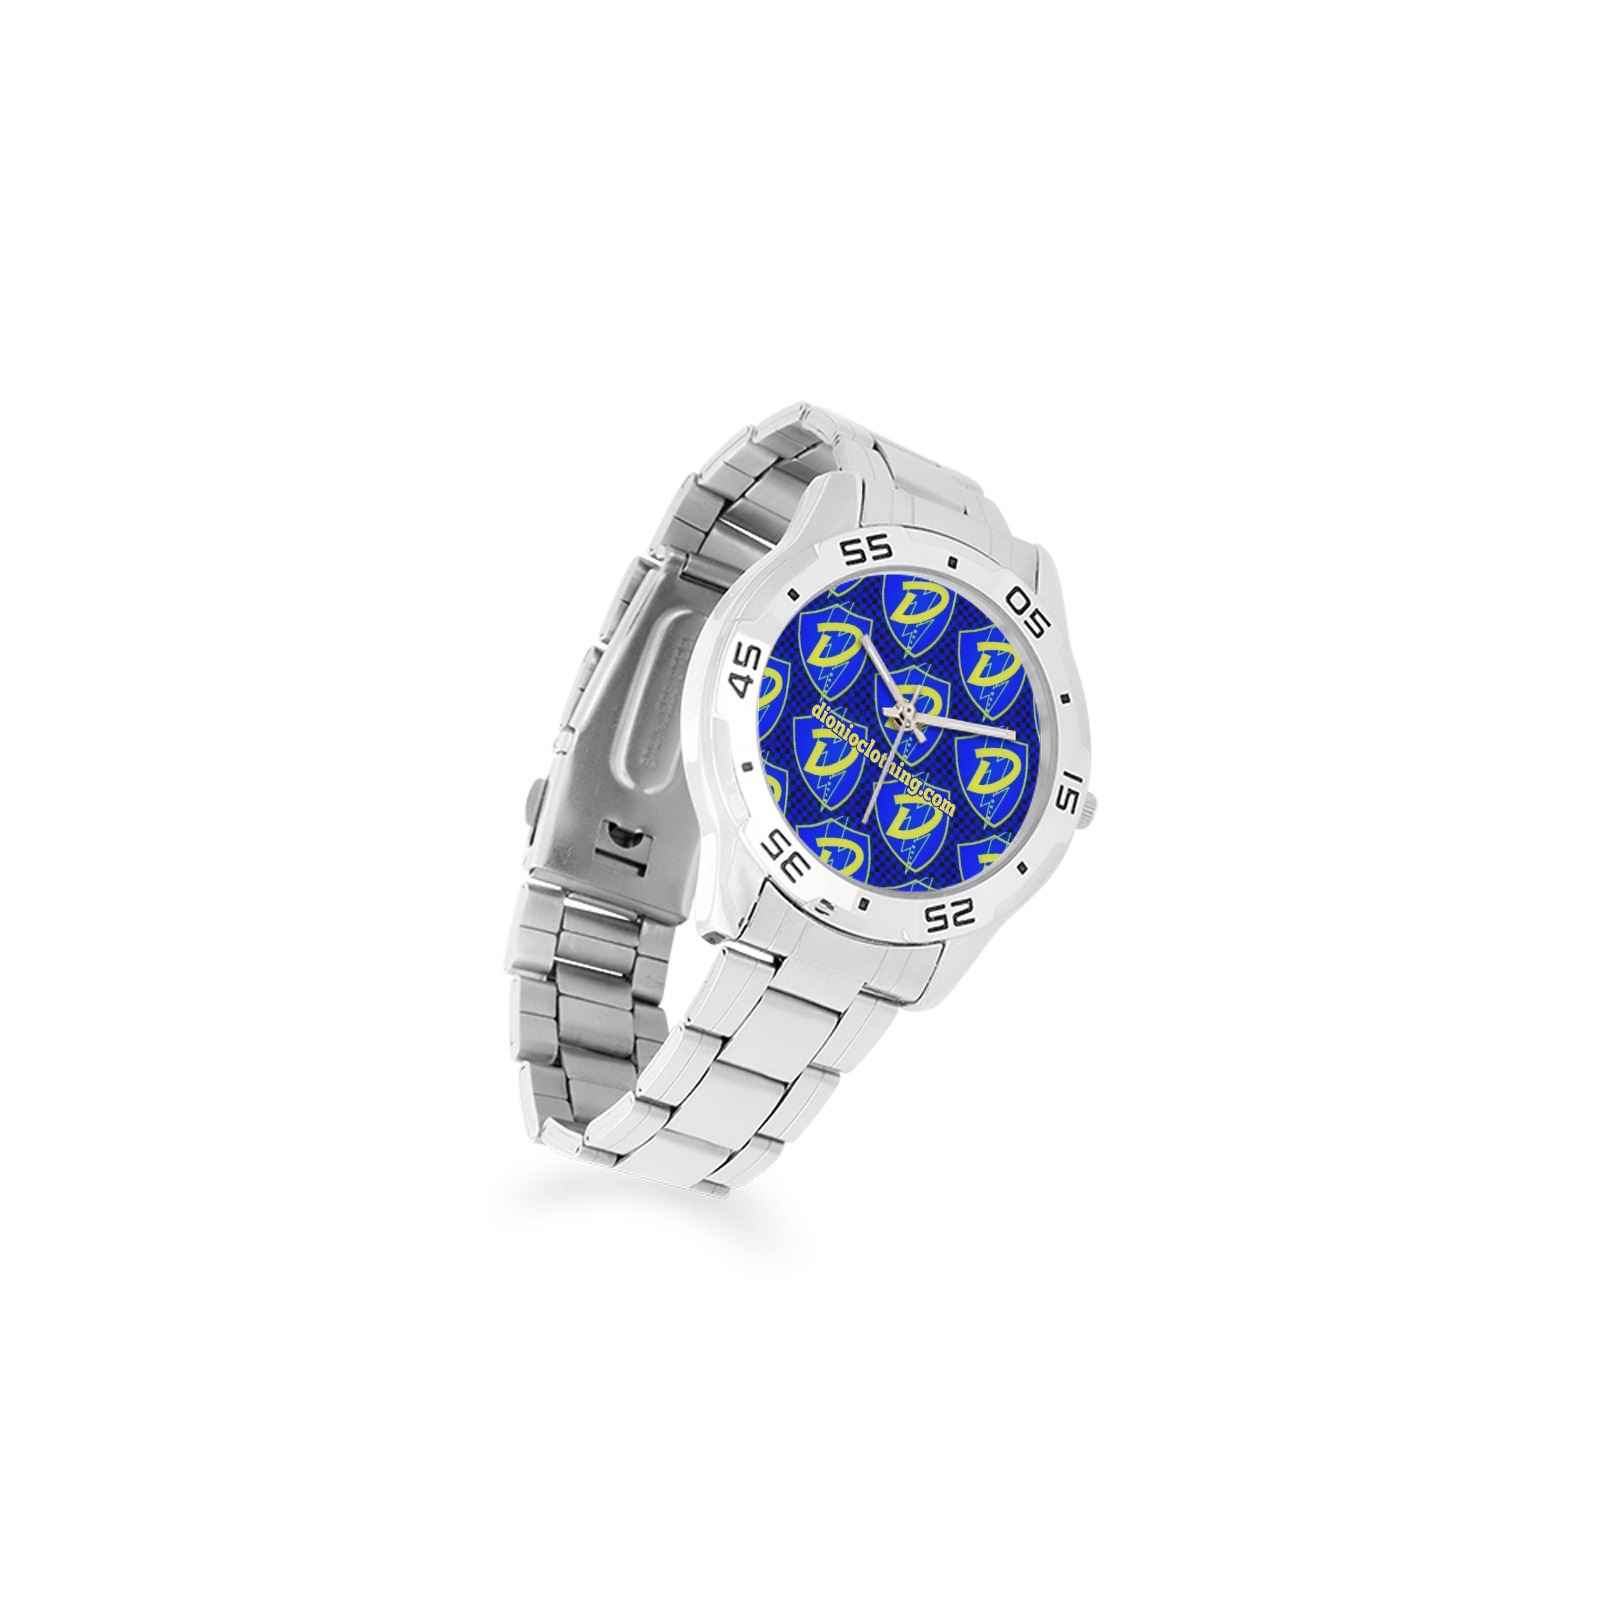 Dionio Clothing - D Shield Repeat (Blue ,Black & Yellow) Stainless Steel Analog Watch Men's Stainless Steel Analog Watch(Model 108)